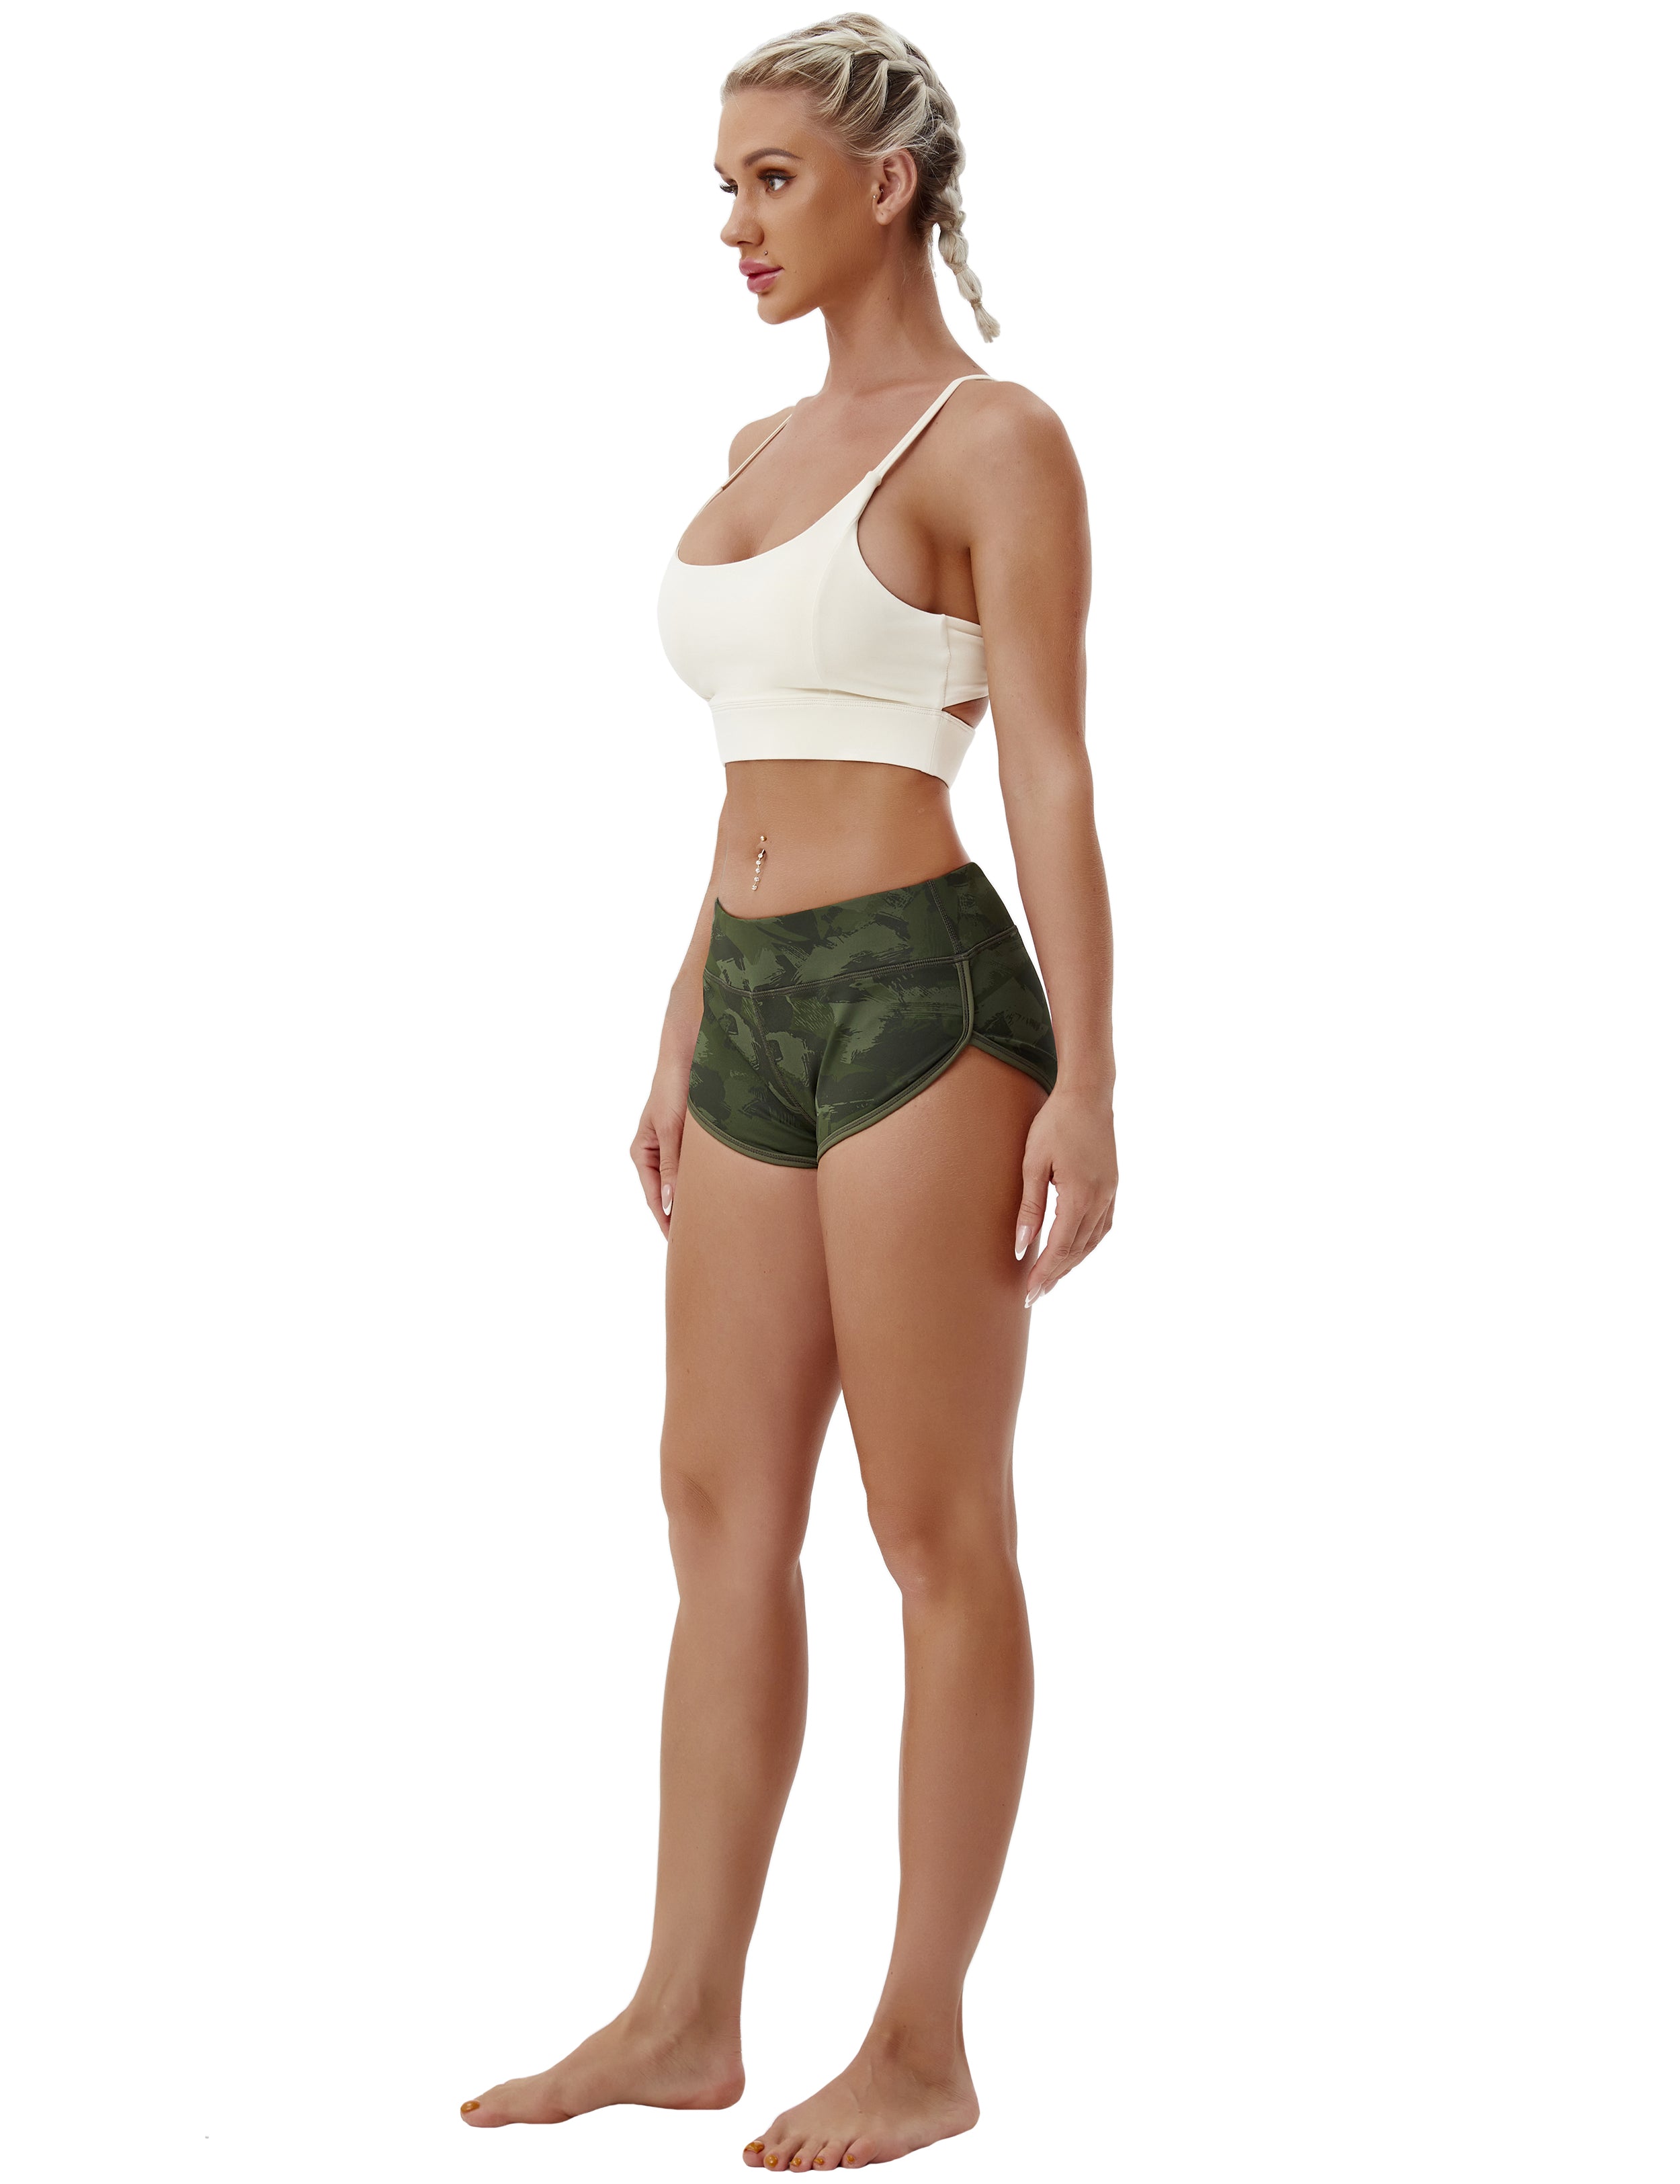 Printed Booty Biking Shorts green brushcamo Sleek, soft, smooth and totally comfortable: our newest sexy style is here. Softest-ever fabric High elasticity High density 4-way stretch Fabric doesn't attract lint easily No see-through Moisture-wicking Machine wash 78% Polyester, 22% Spandex